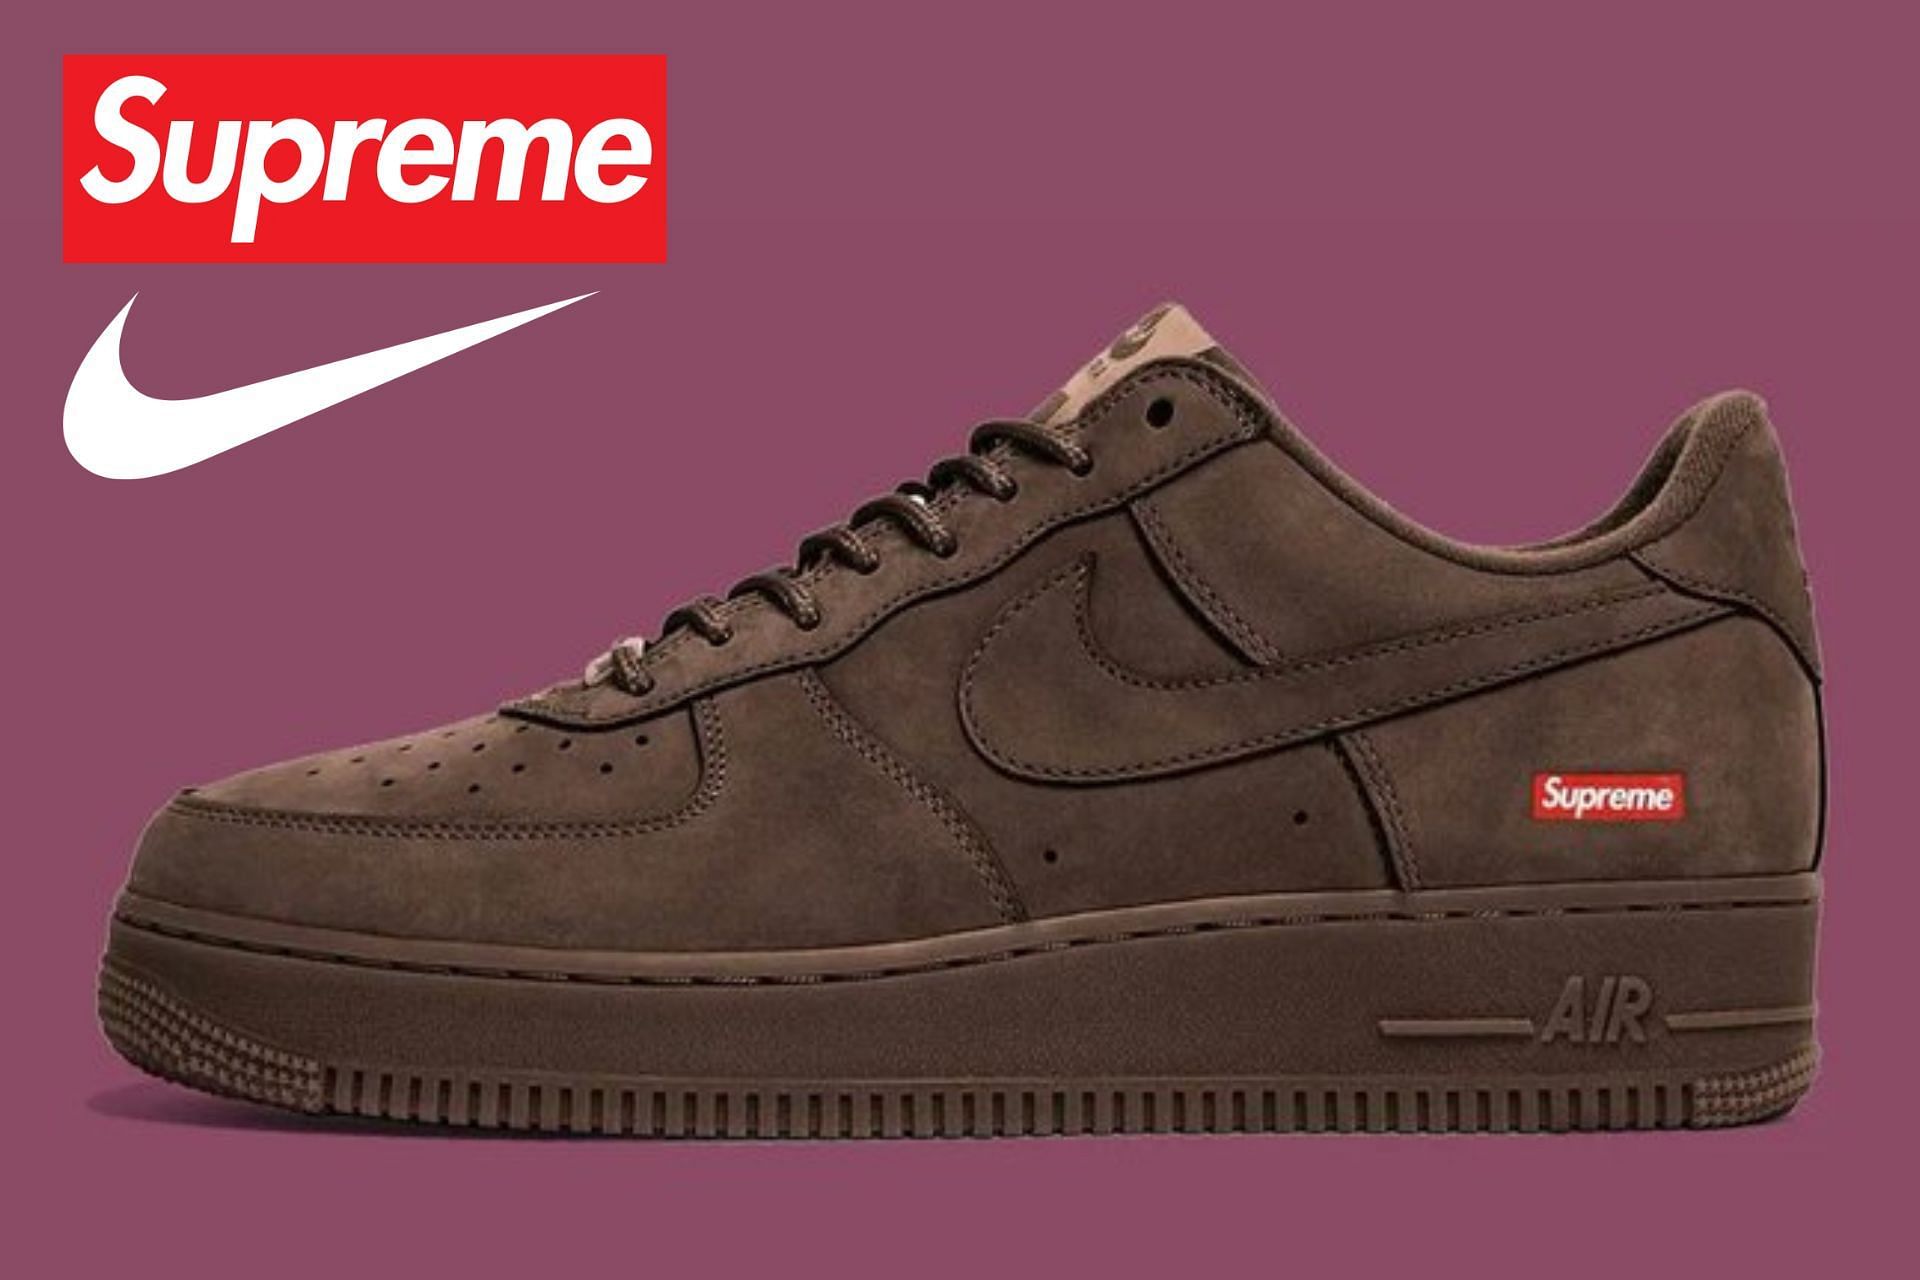 Finally, the Supreme x Nike Air Force 1 Baroque Brown Is